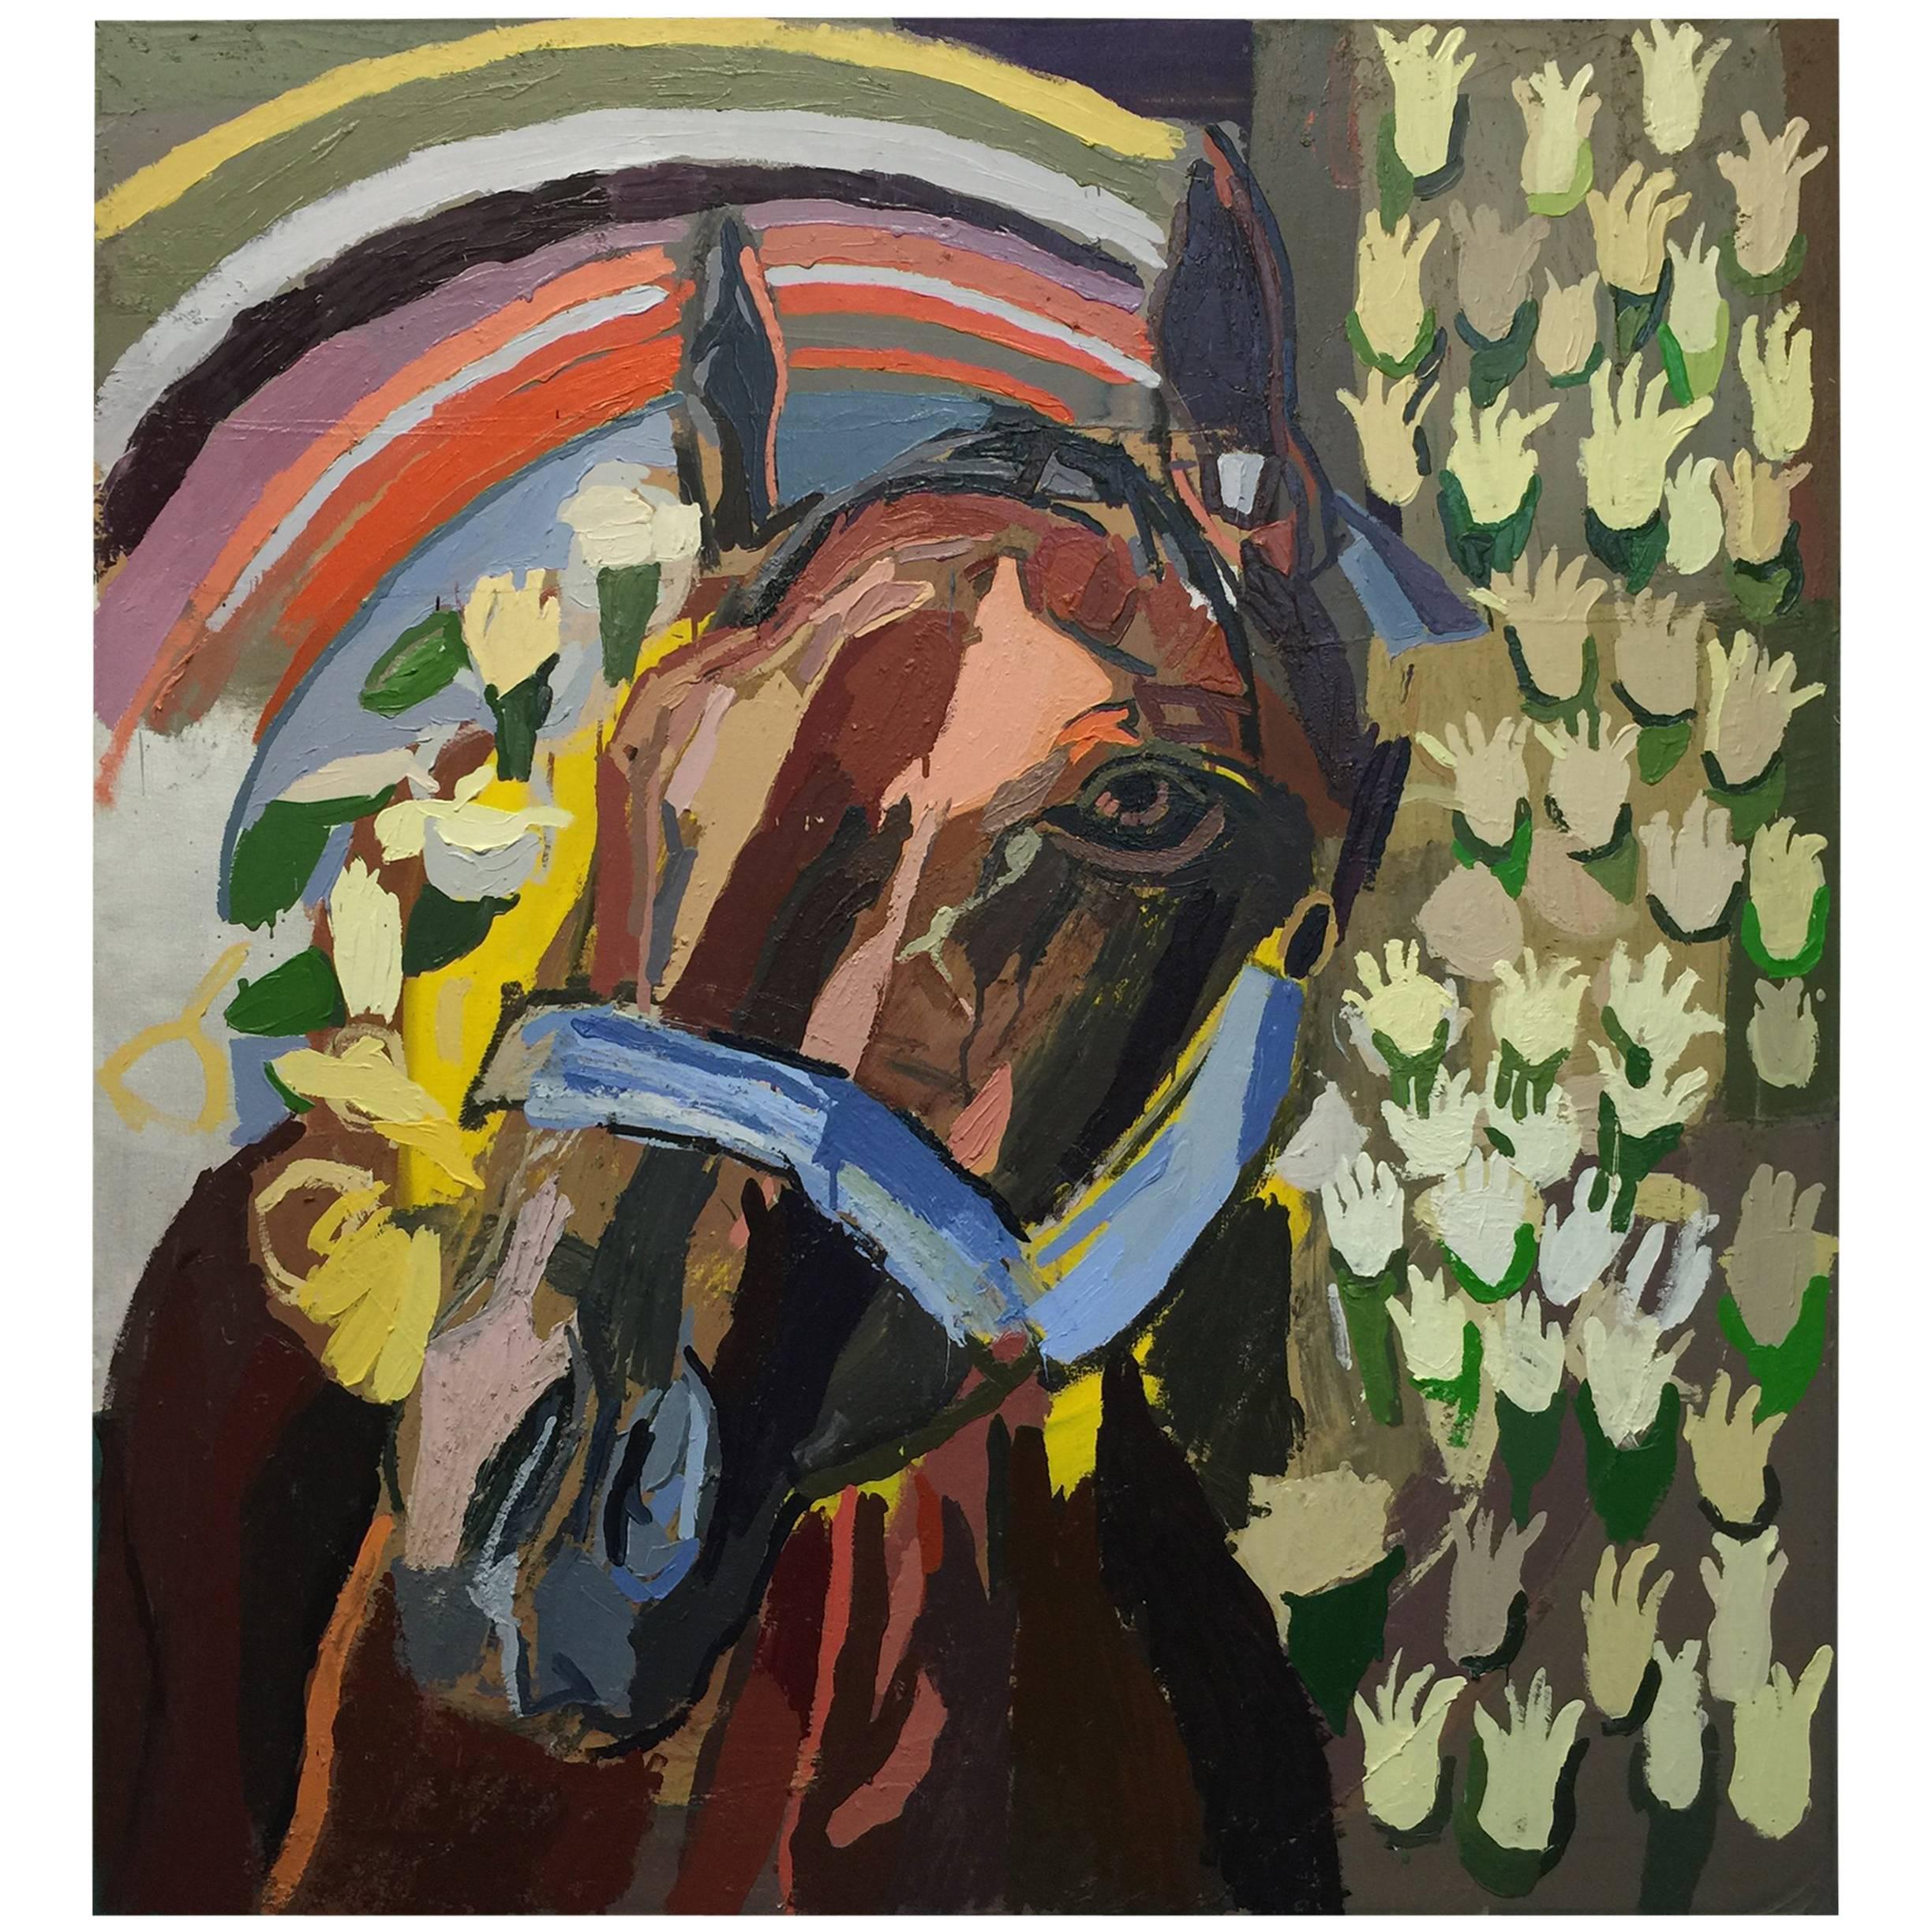 American Pharoah Oil Painting by New York City Artist Clintel Steed, 2015 For Sale